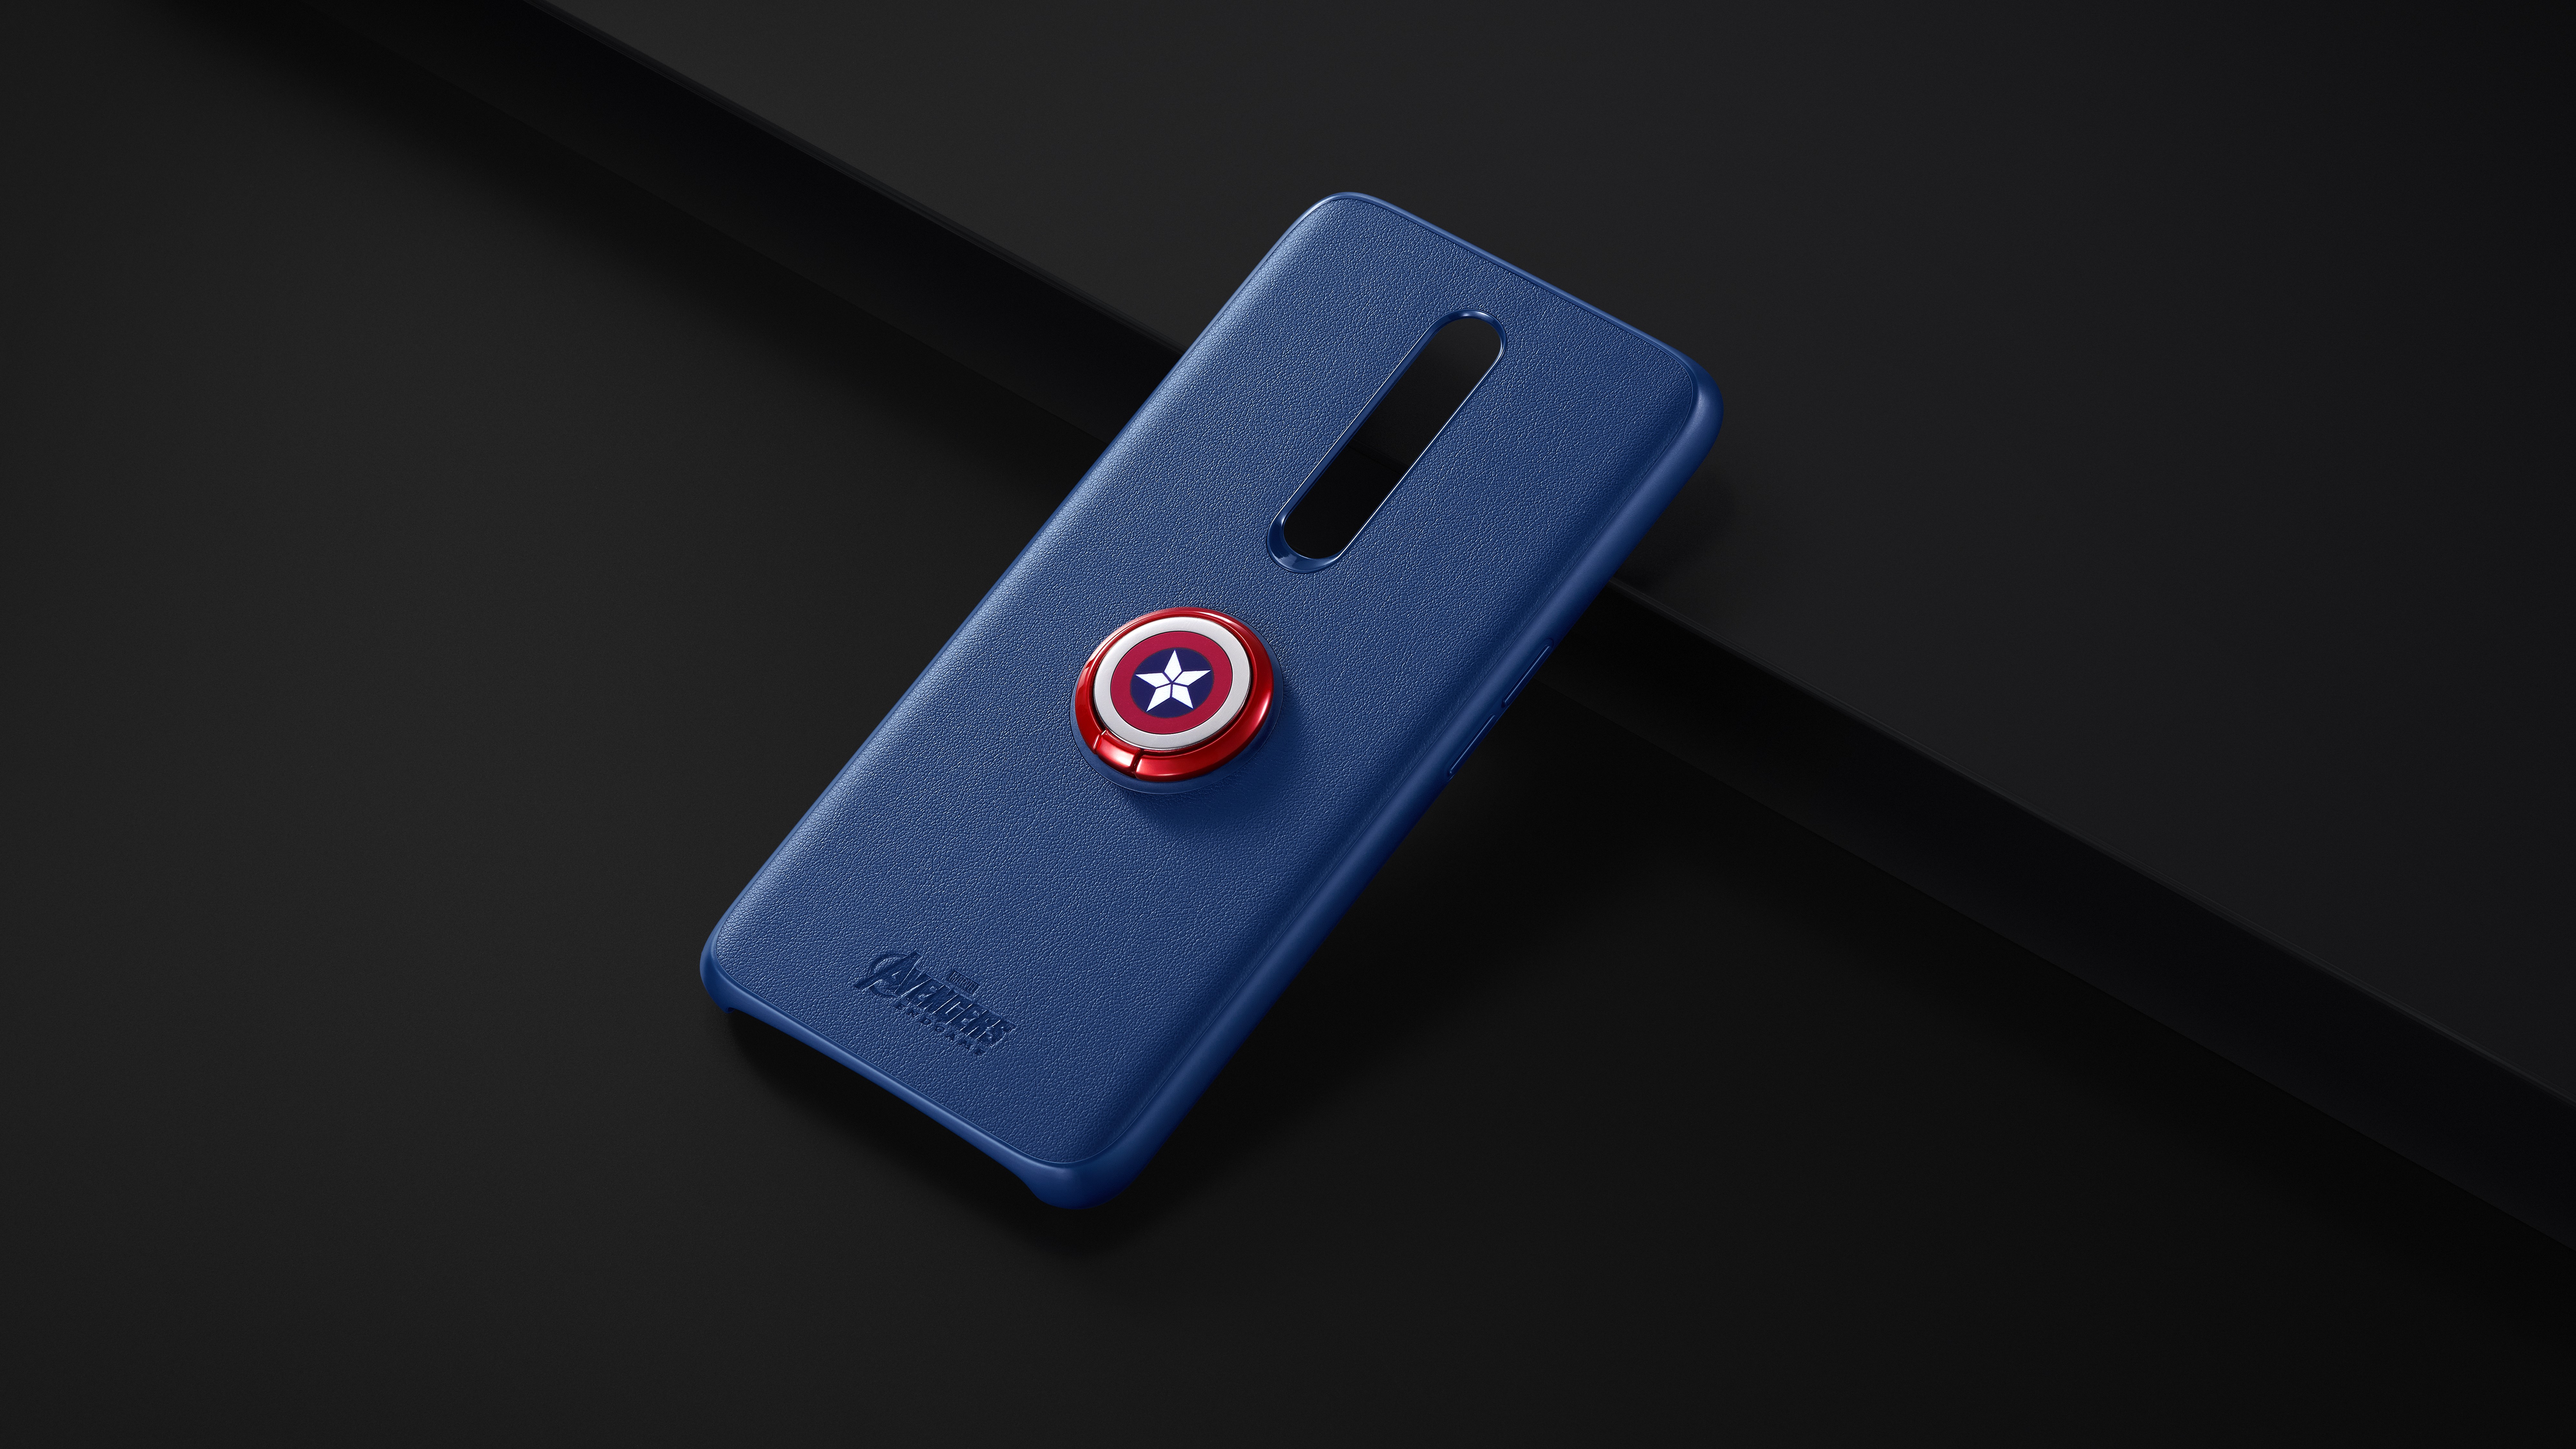 OPPO Announces Exclusive F11 Pro Marvel’s Avengers Limited Edition in Cooperation with Marvel Studios’ Avengers: Endgame